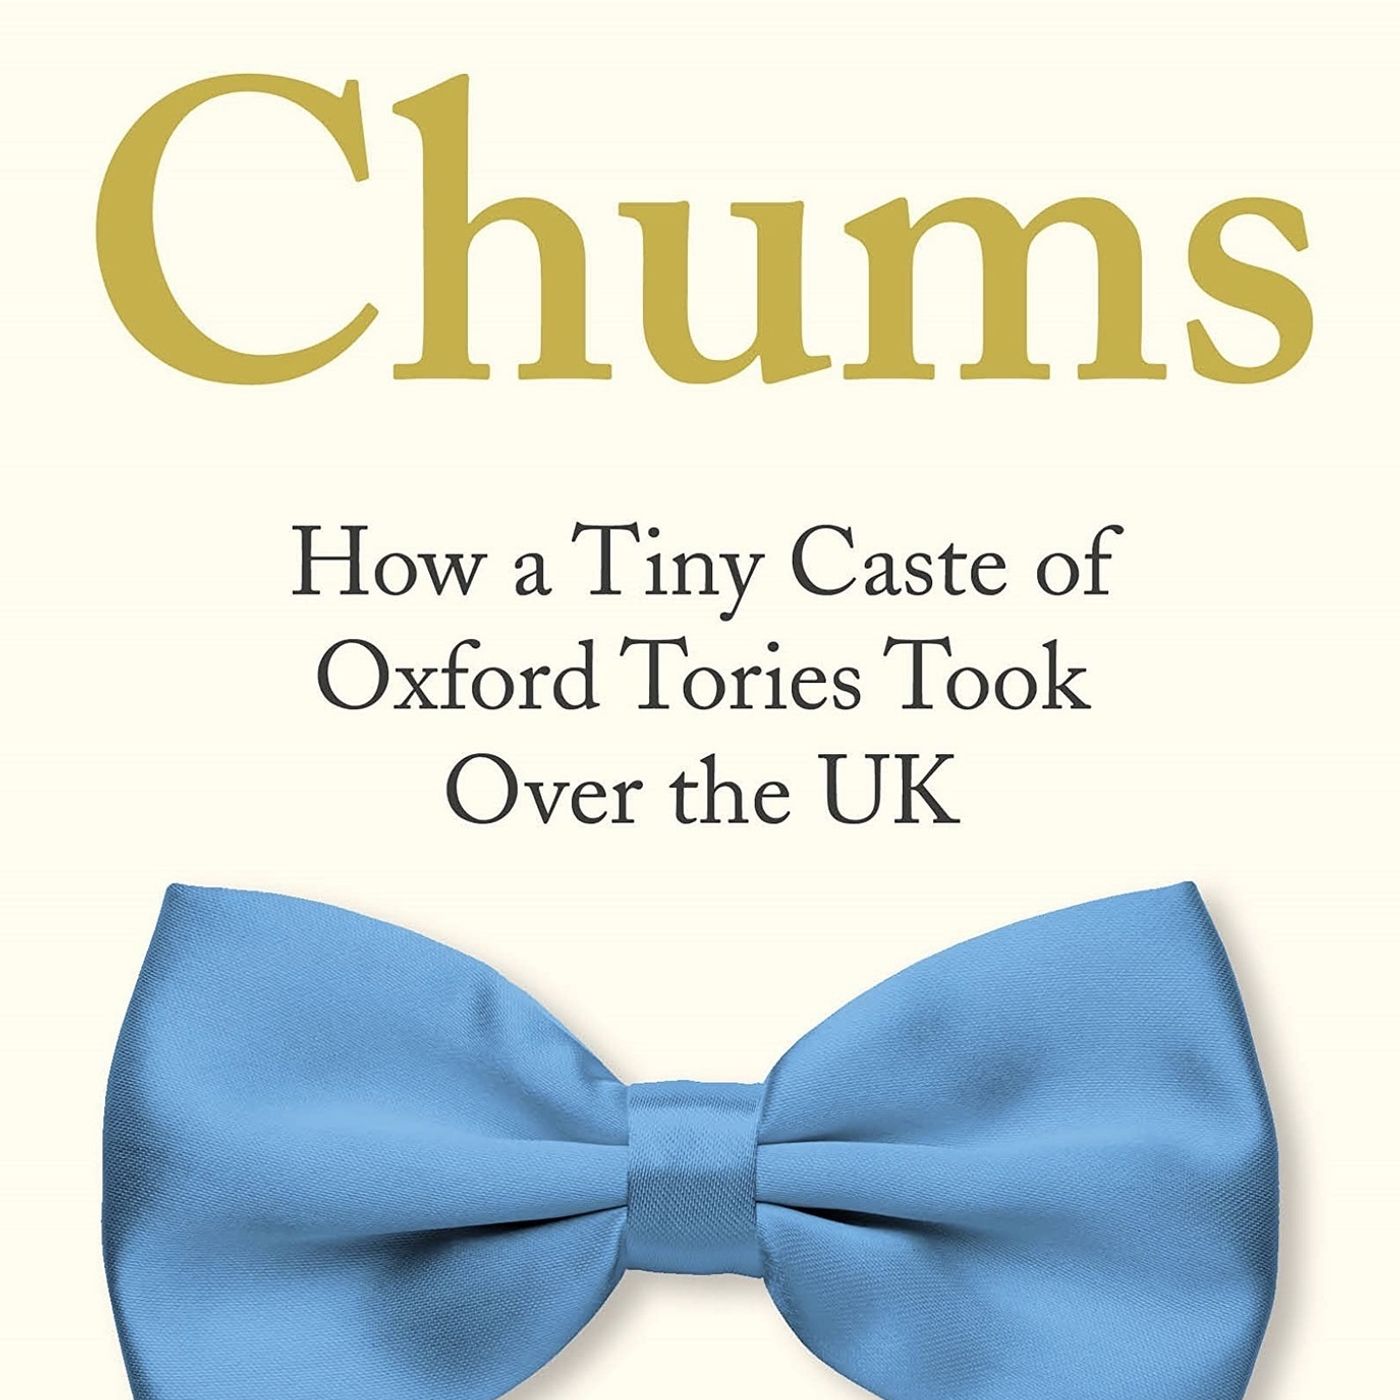 Simon Kuper: How a Tiny Caste of Oxford Tories Took Over the UK